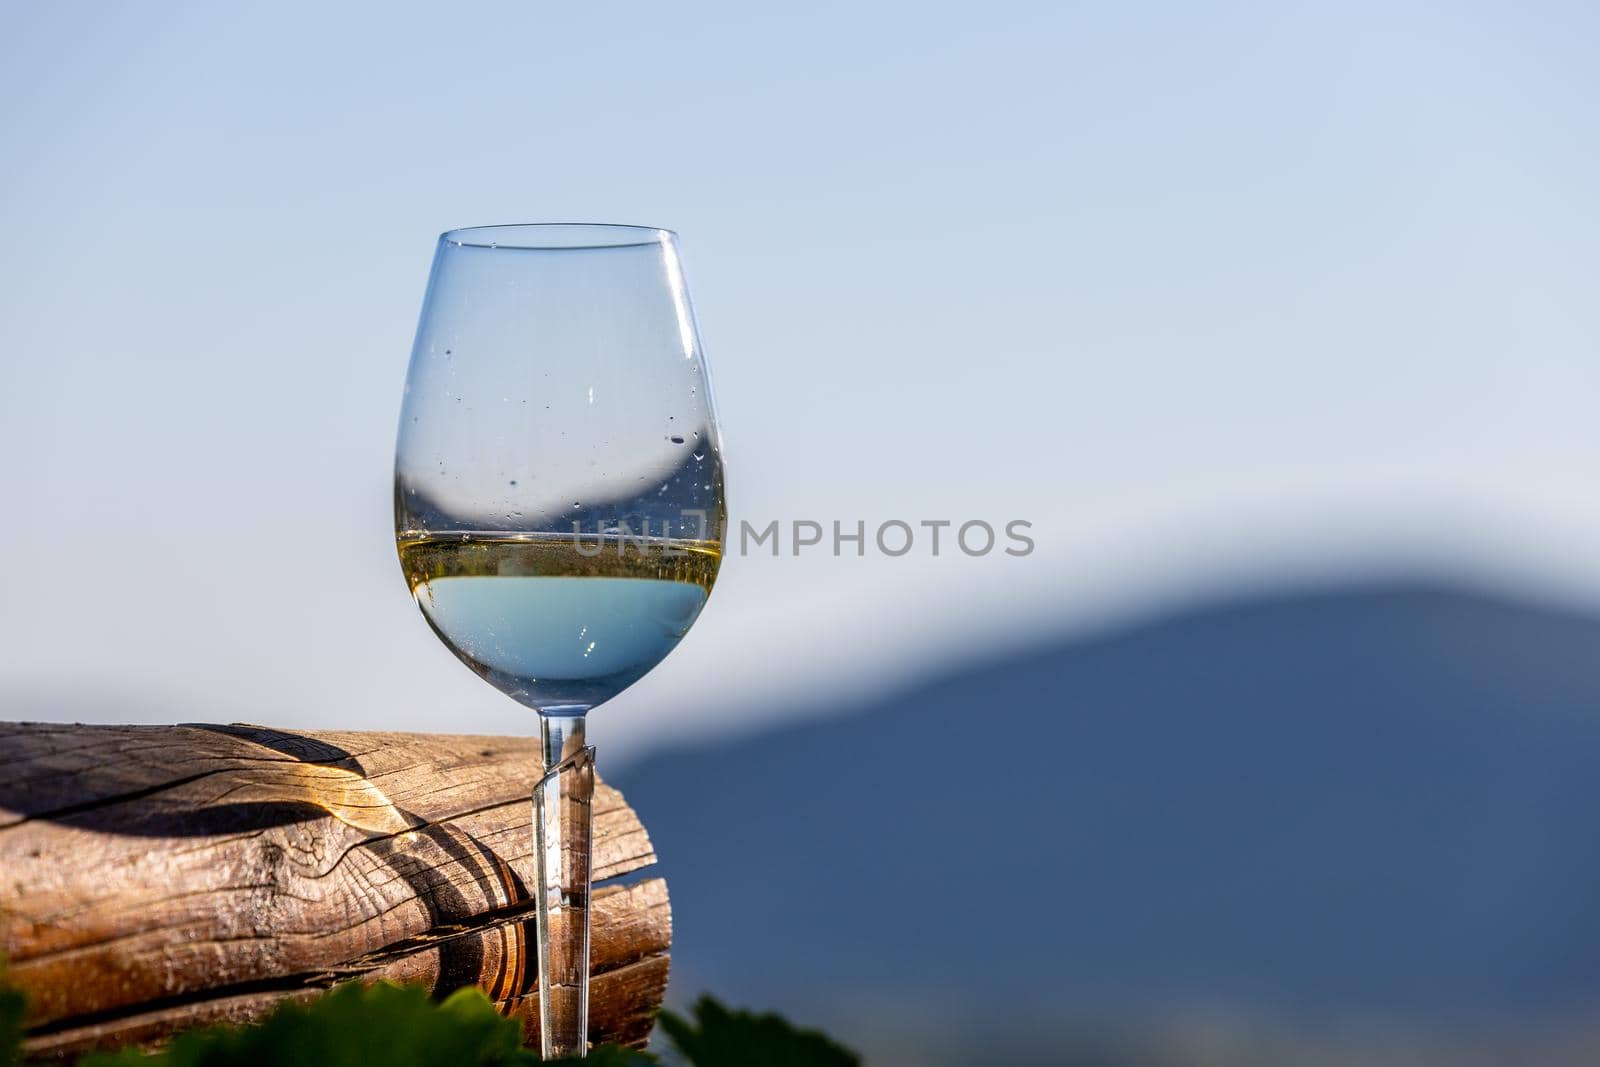 Filled wine glass next to wooden beam and defocused landscape in background